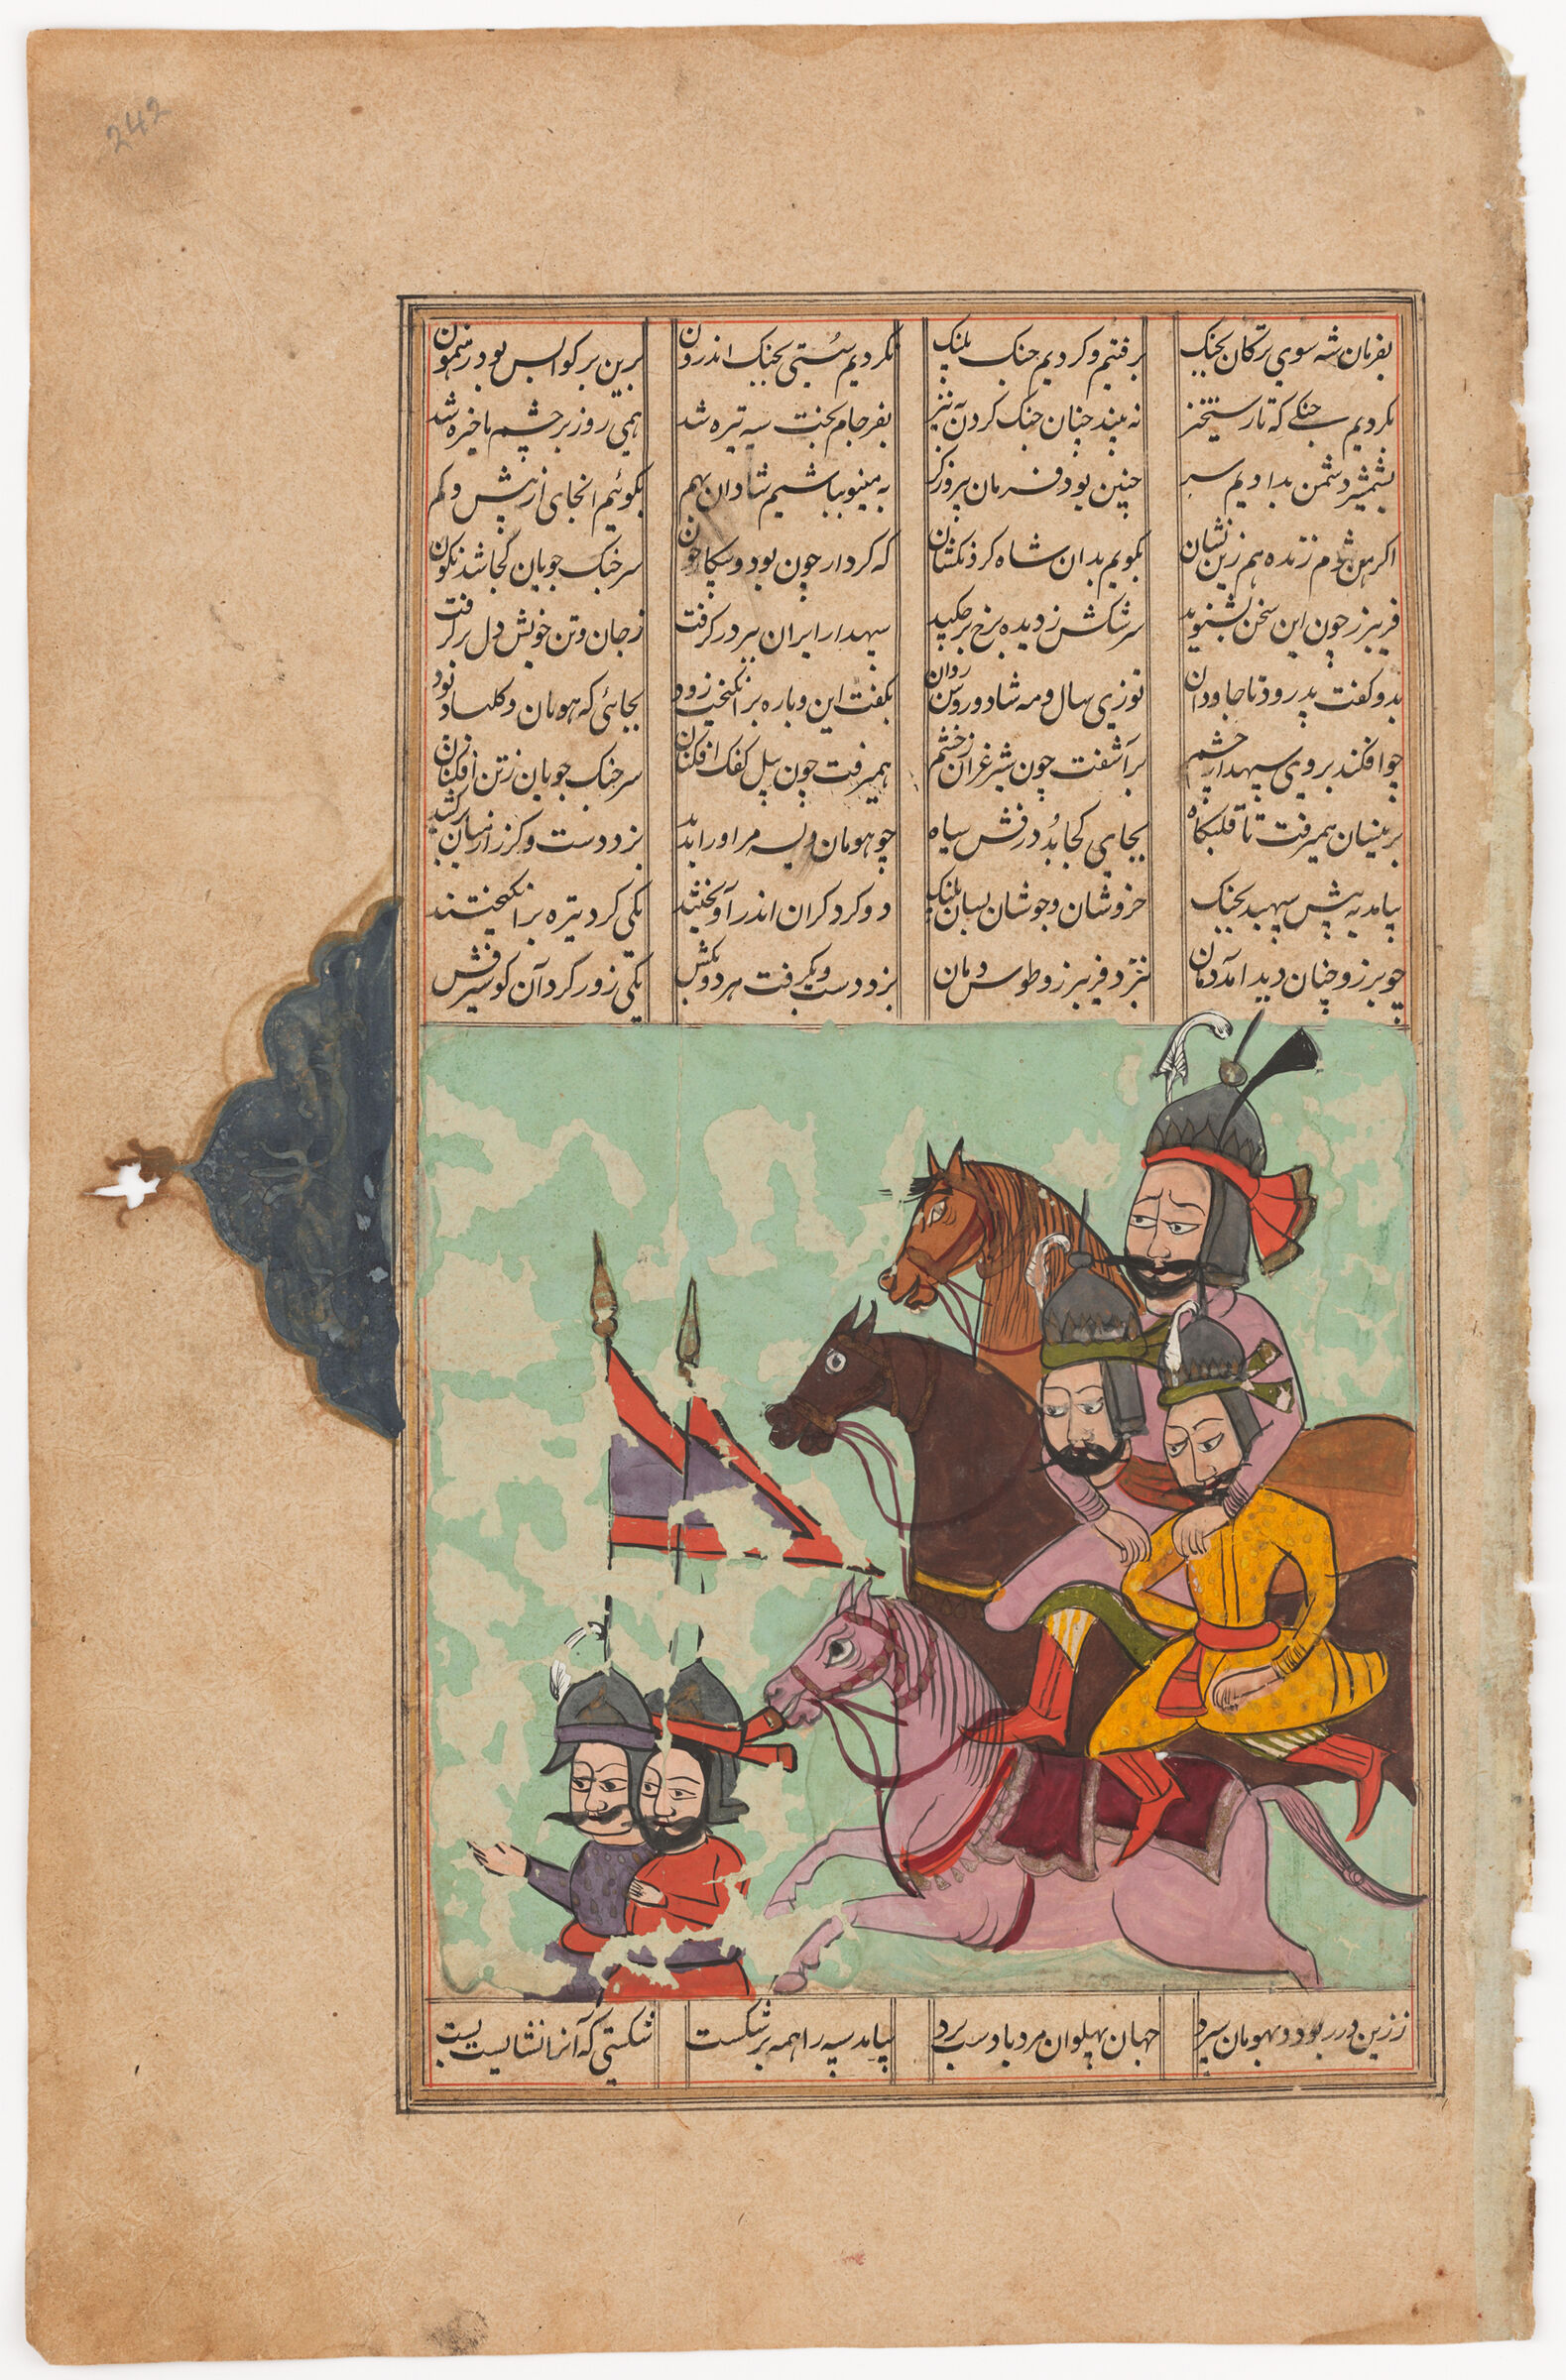 Barzu Defeats The Iranian Heros Tus And Fariburz, And Takes Them As Prisoners (Painting Recto; Text Verso Of Folio 242), Illustrated Folio From A Manuscript Of The Shahnama By Firdawsi